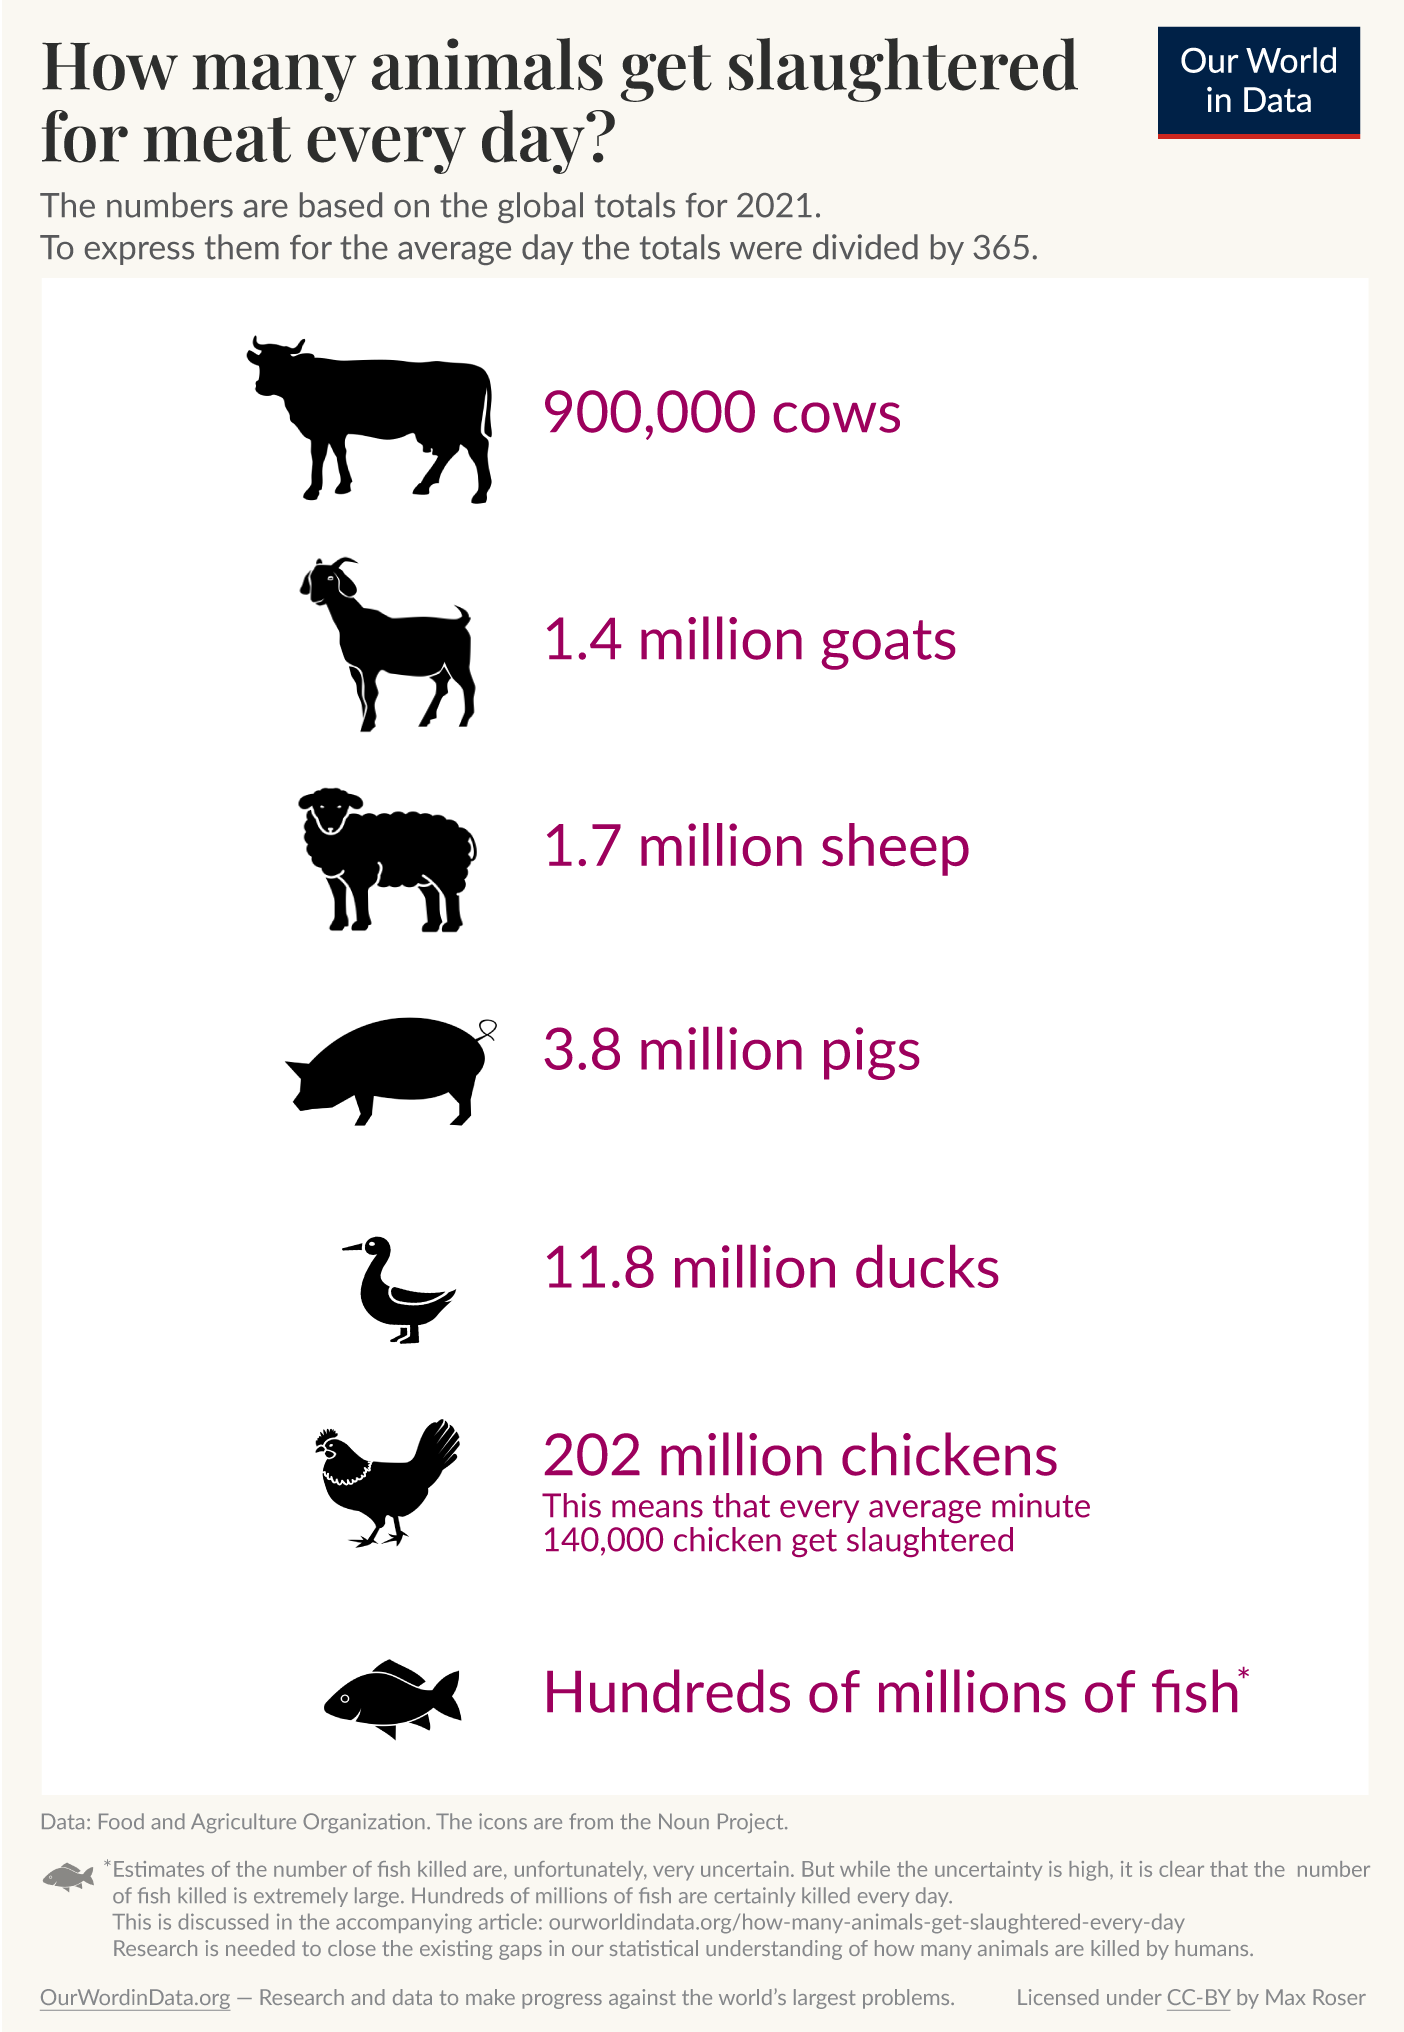 We today are living in a world in which we kill 900,000 cows, 1.4 million goats, 1.7 million sheep, 3.8 million pigs, and more than 200 million chicken every day